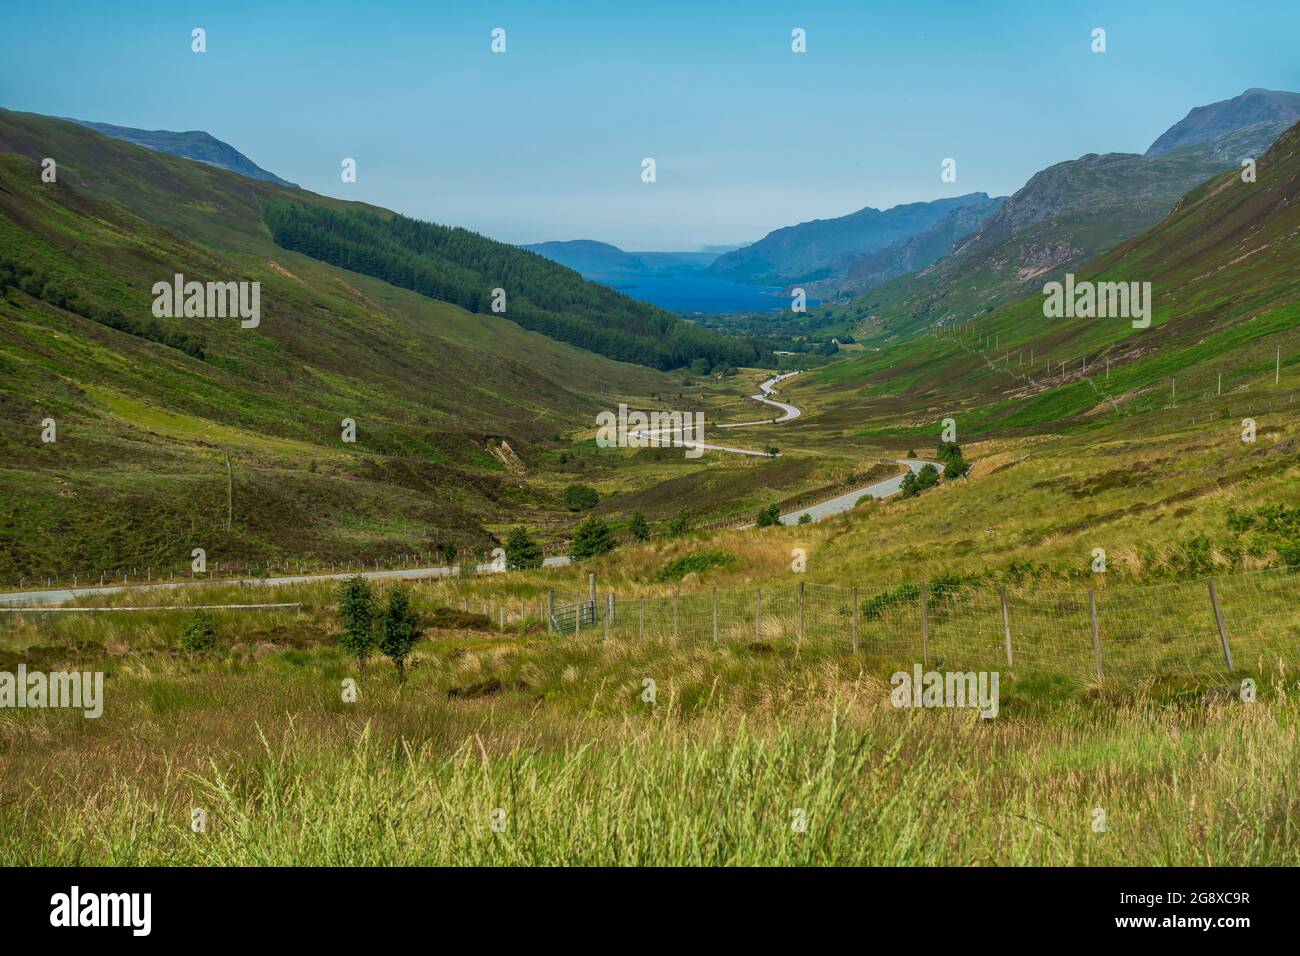 The view down Glen Docherty on the A832 road, with Loch Maree and Kinlochewe in the distance, Scotland Stock Photo